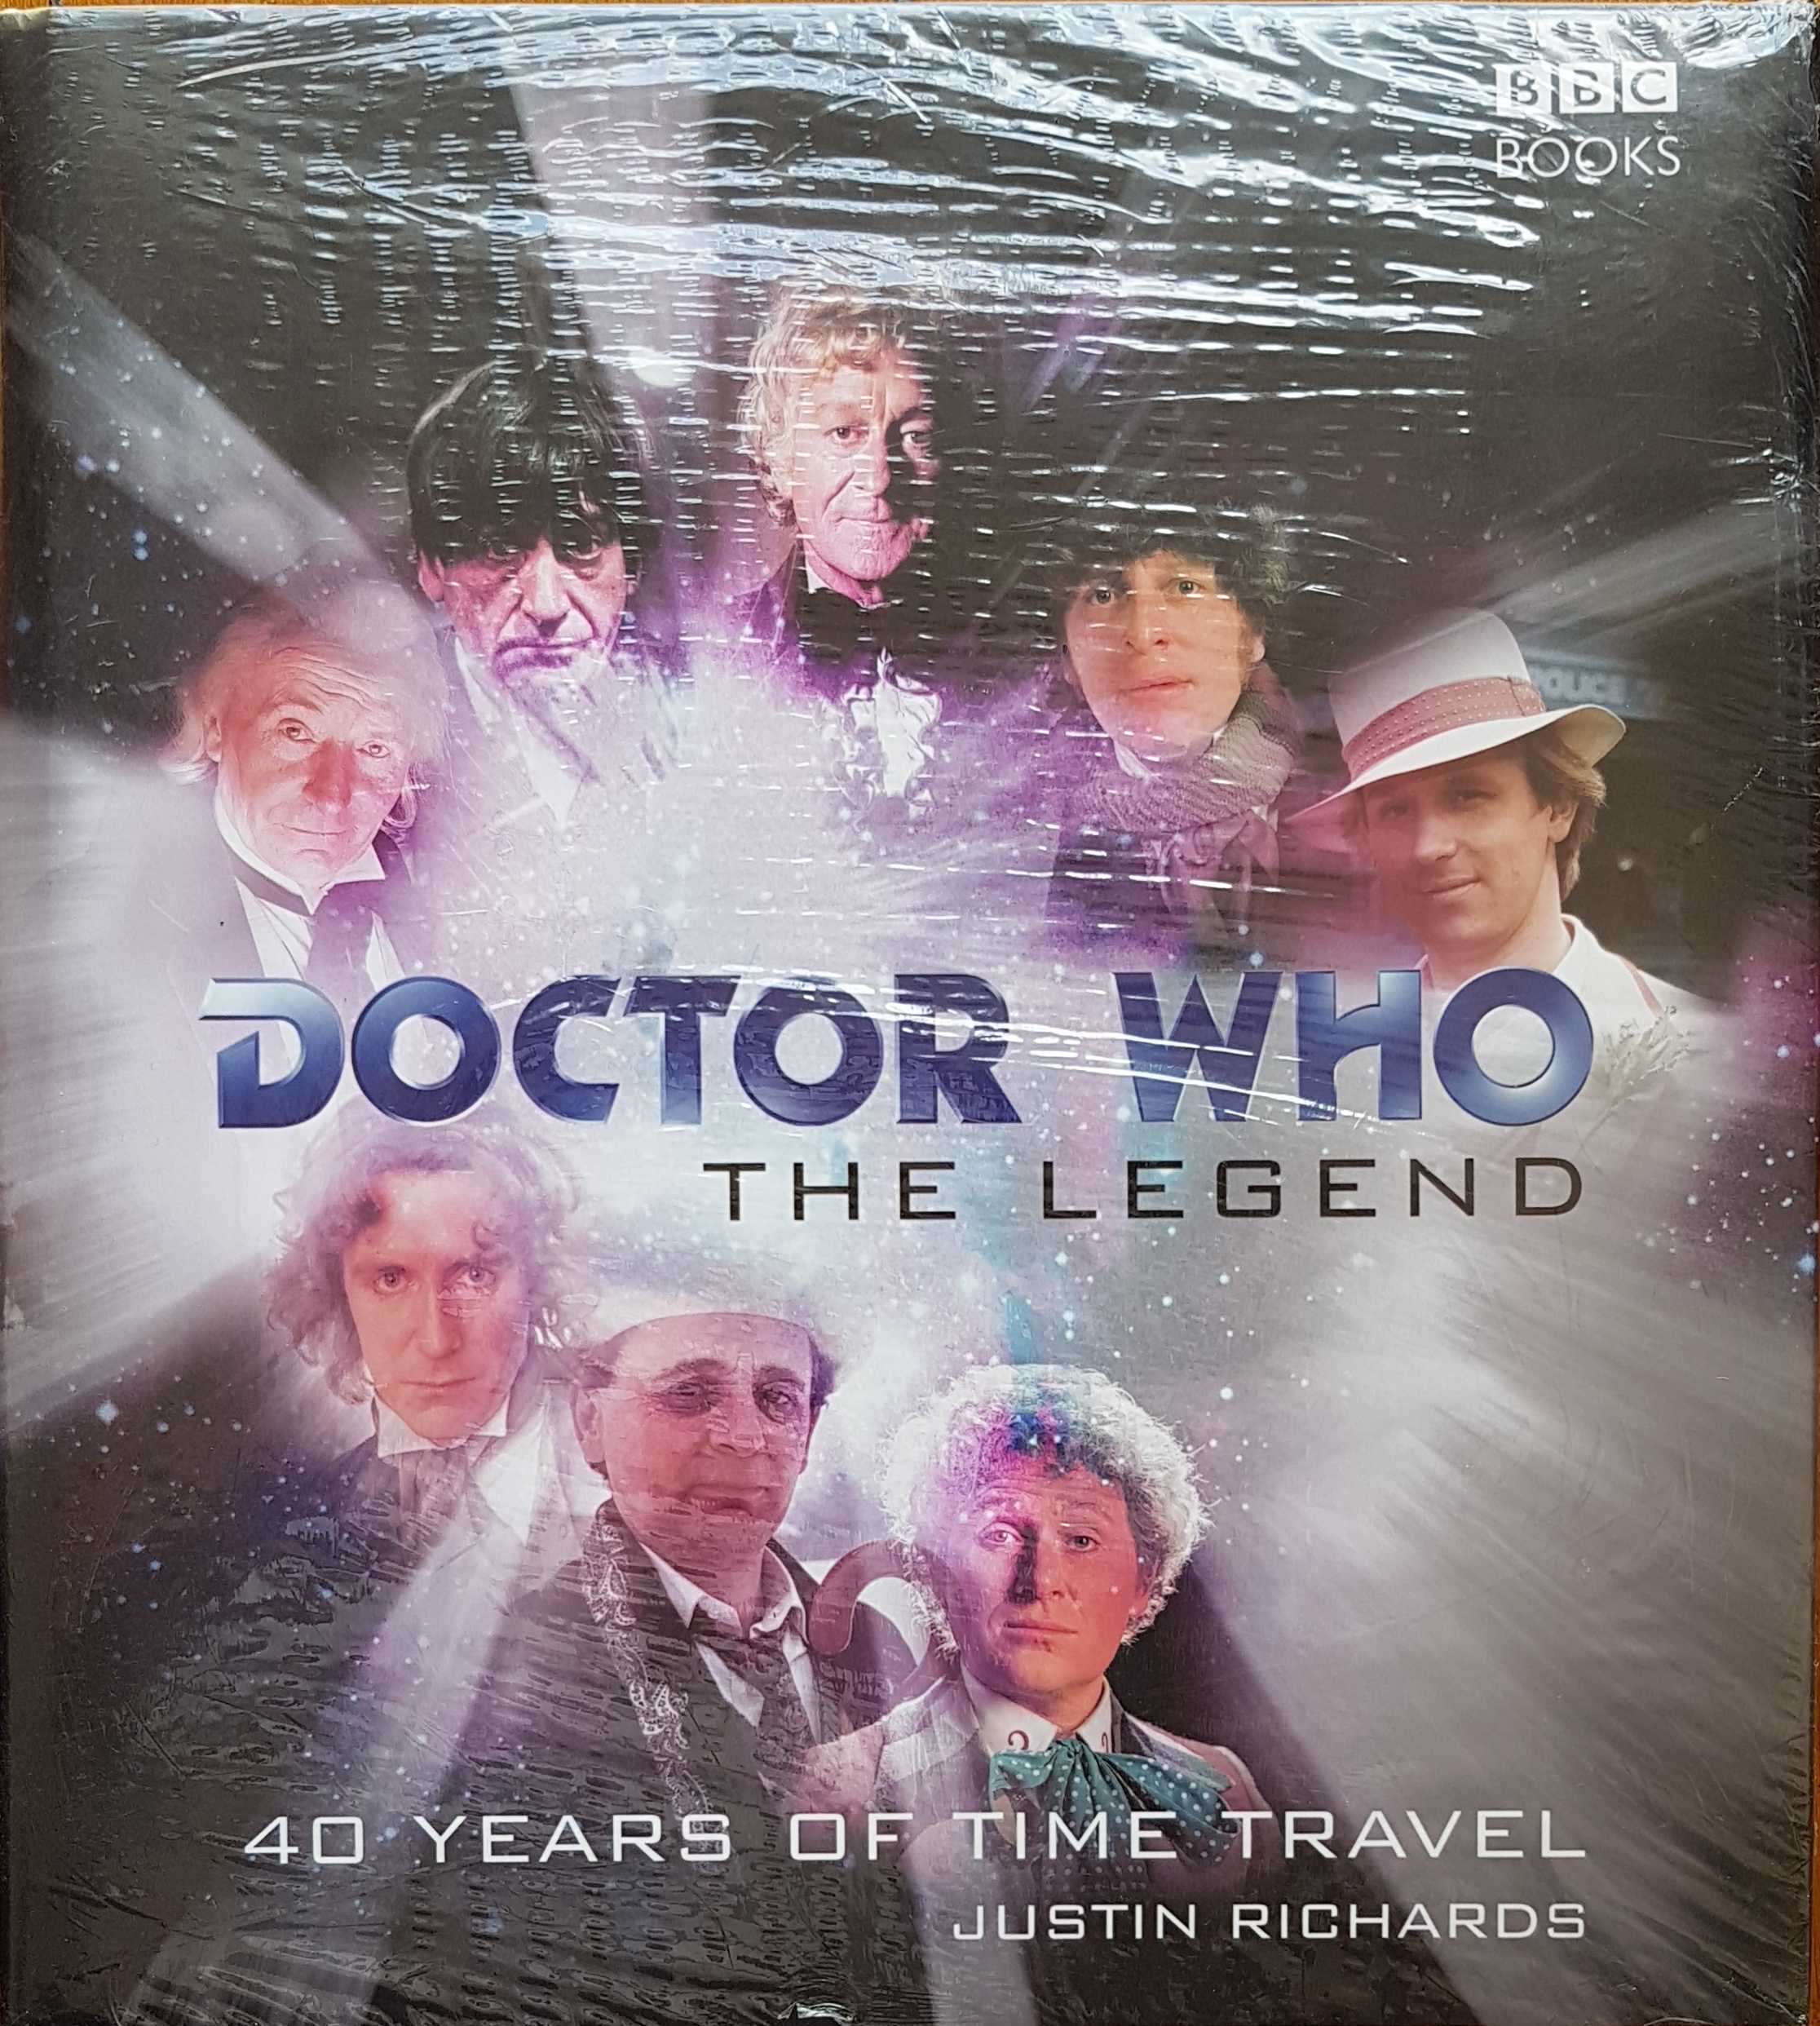 Picture of Doctor Who - The legend by artist Justin Richards from the BBC books - Records and Tapes library